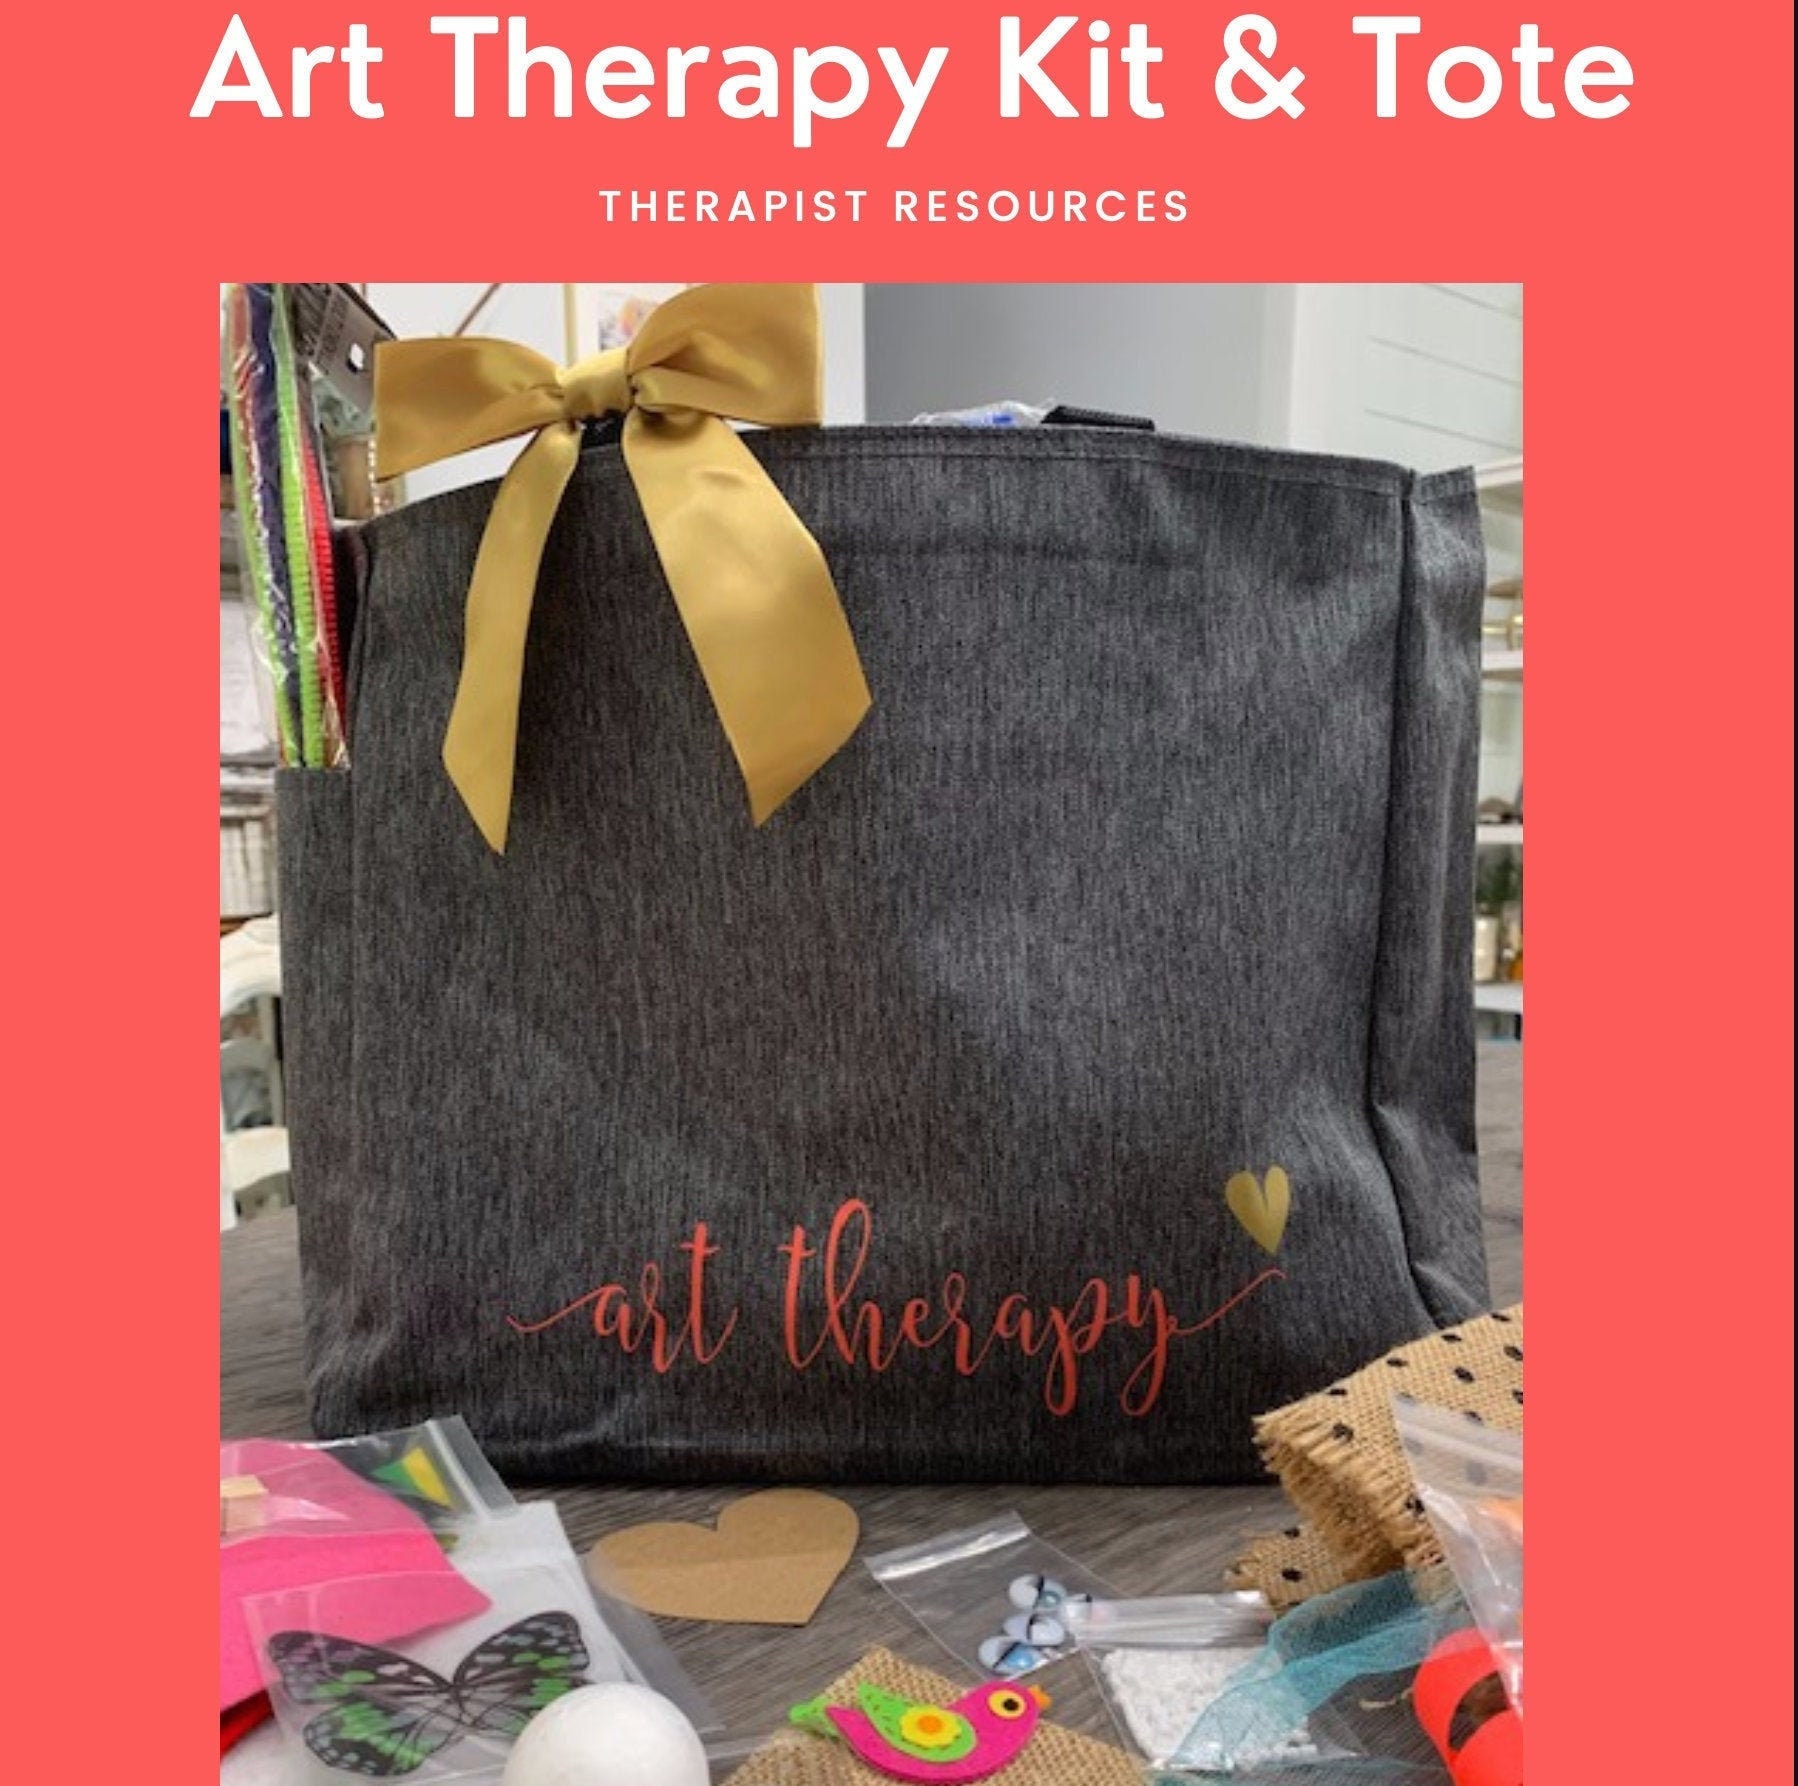 OEFY Art Therapy Supplies Kit - 20+ Art Therapy Activities, Expressive Art Projects - Anxiety Tools, Coping Skills, Therapist Supplies for Emotional